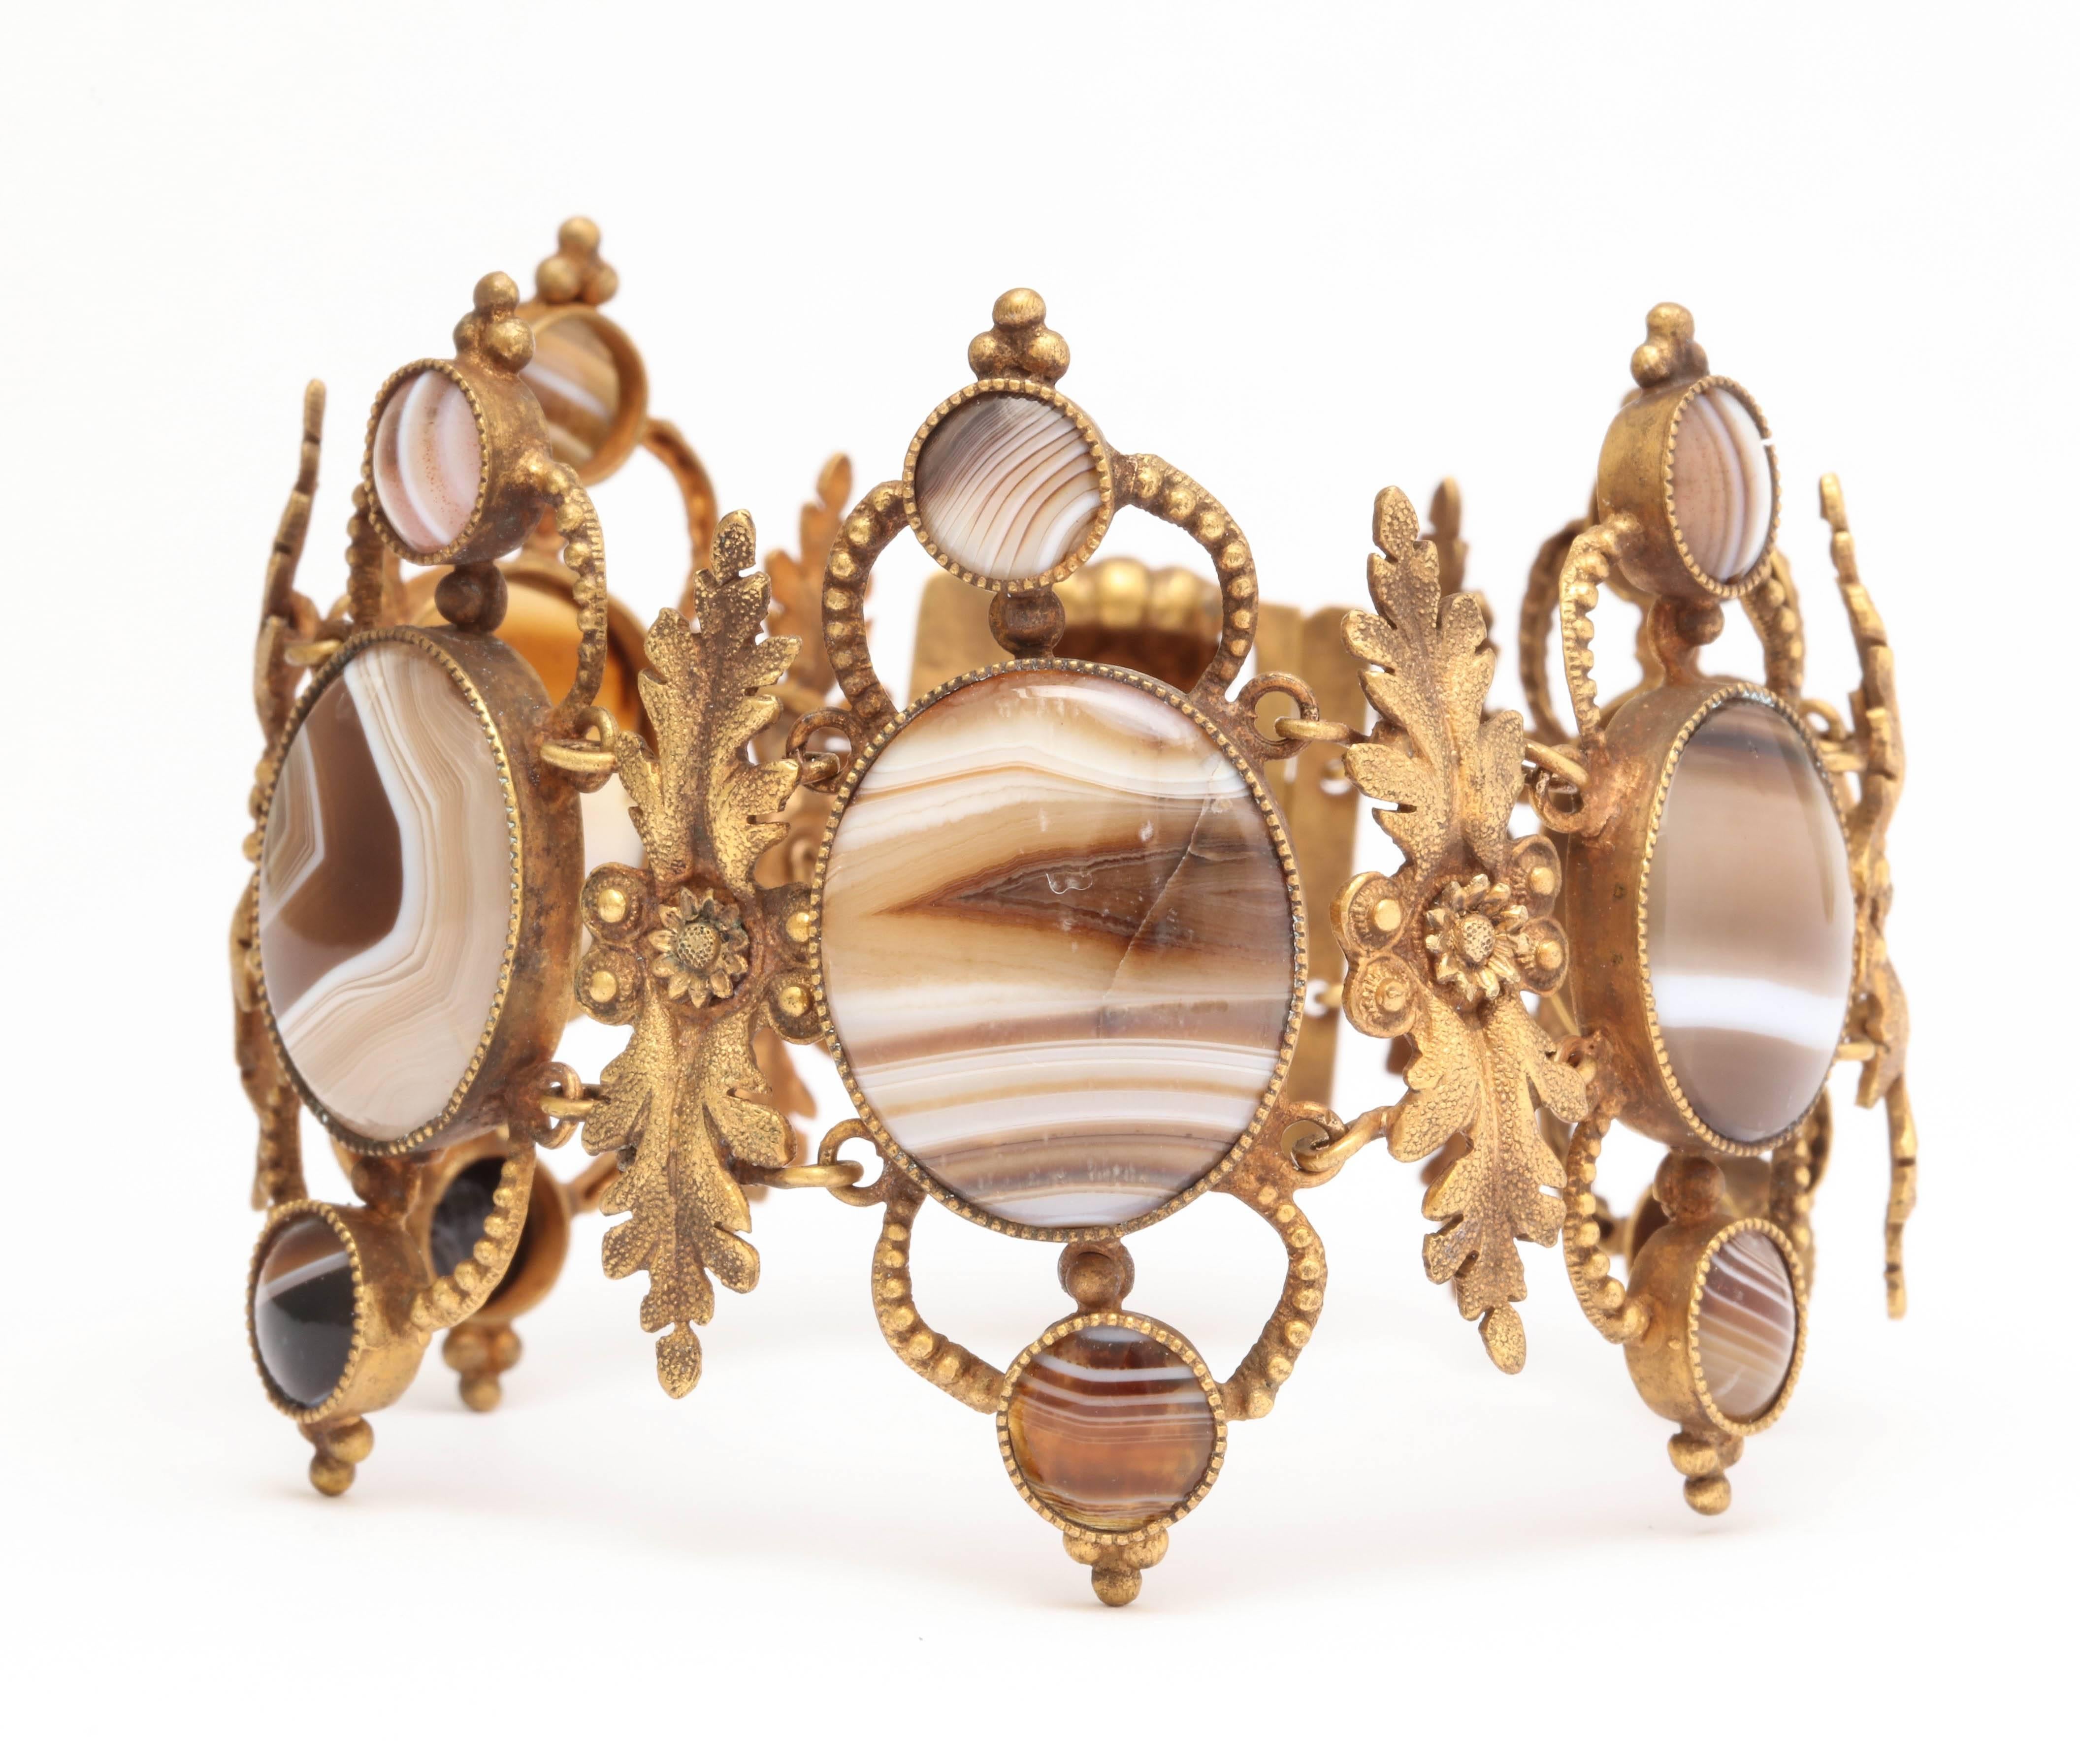 Lovely Agate and Pinchbeck Bracelet In Excellent Condition For Sale In New York, NY